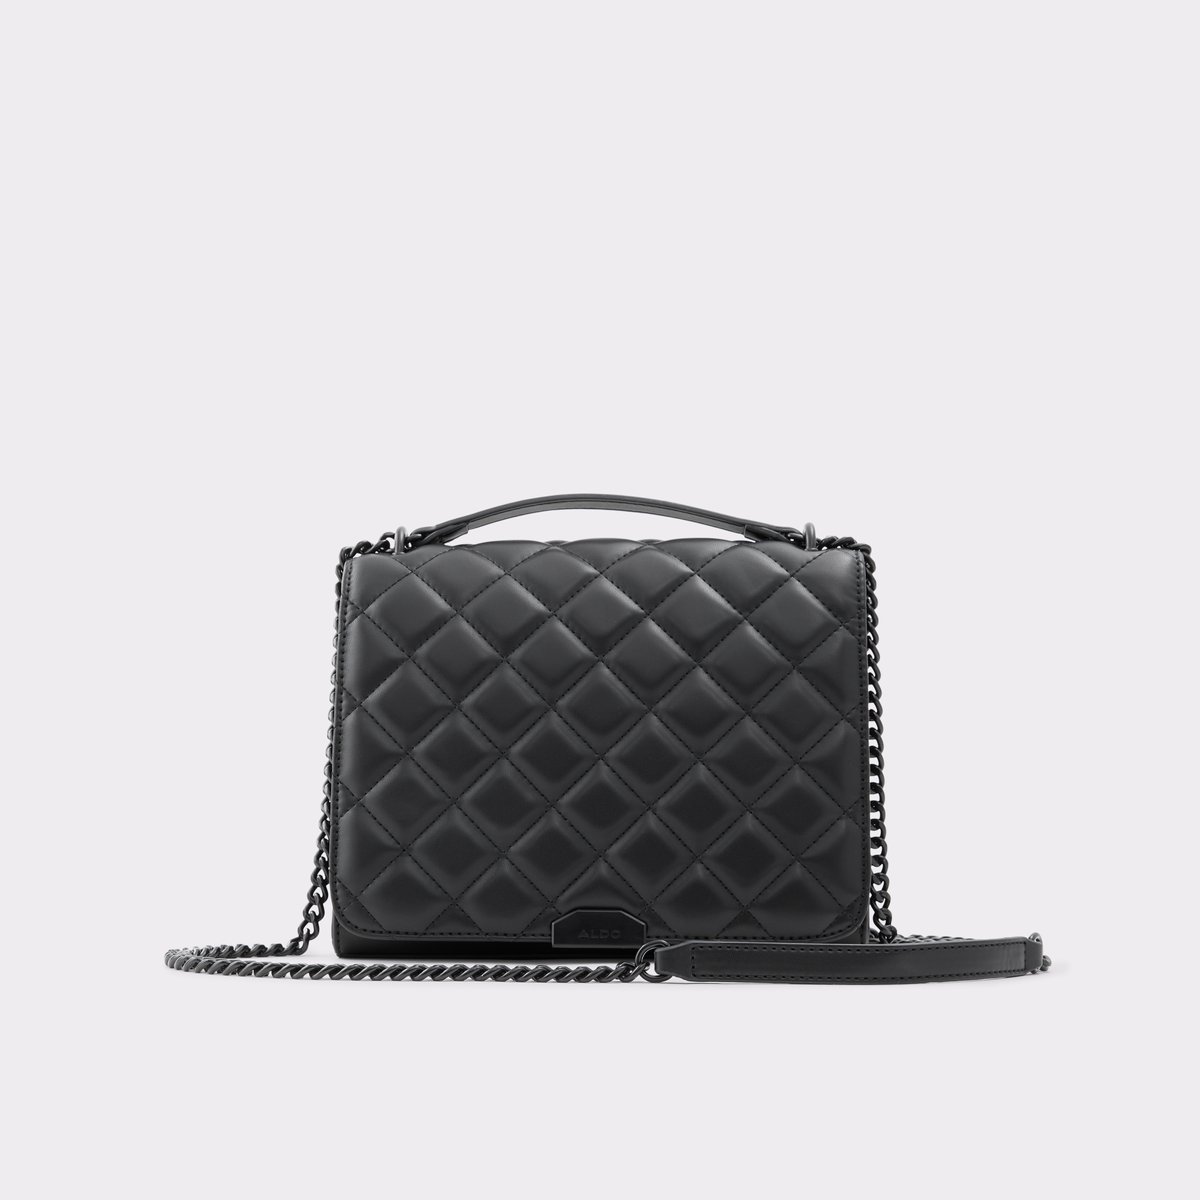 Buy Women's Aldo Marceline Textured Tote Bag with Detachable Crossbody  Strap and Pouch in Black Online